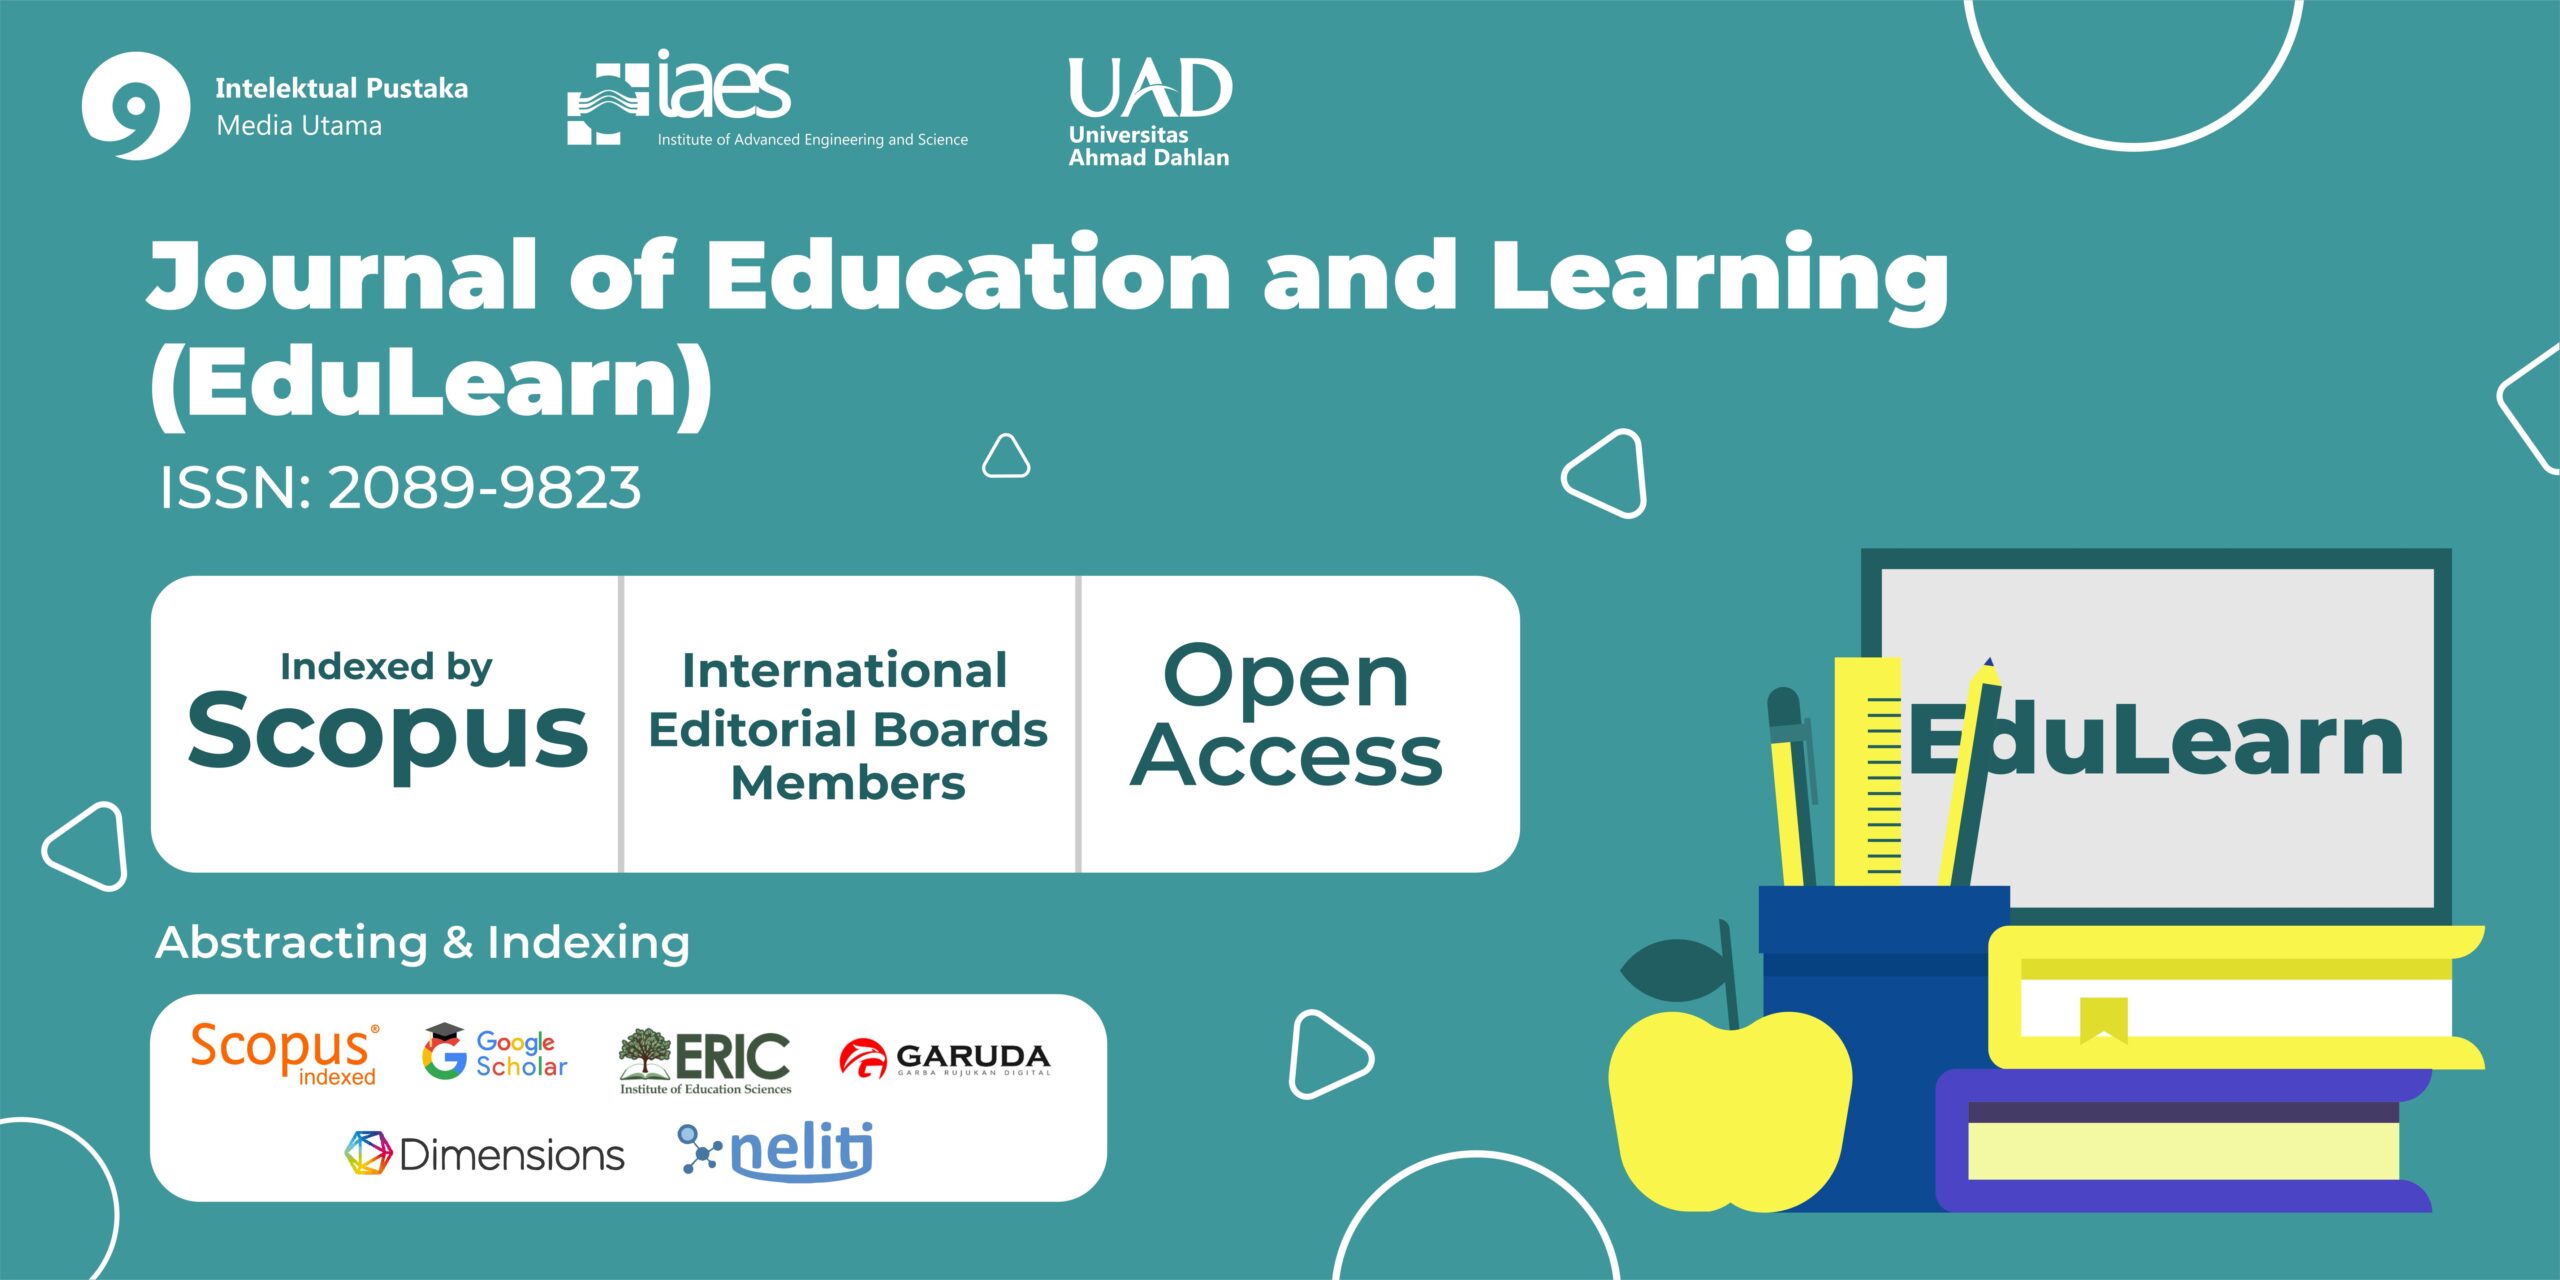 Journal of Education and Learning (EduLearn) is accepted for indexation in Scopus